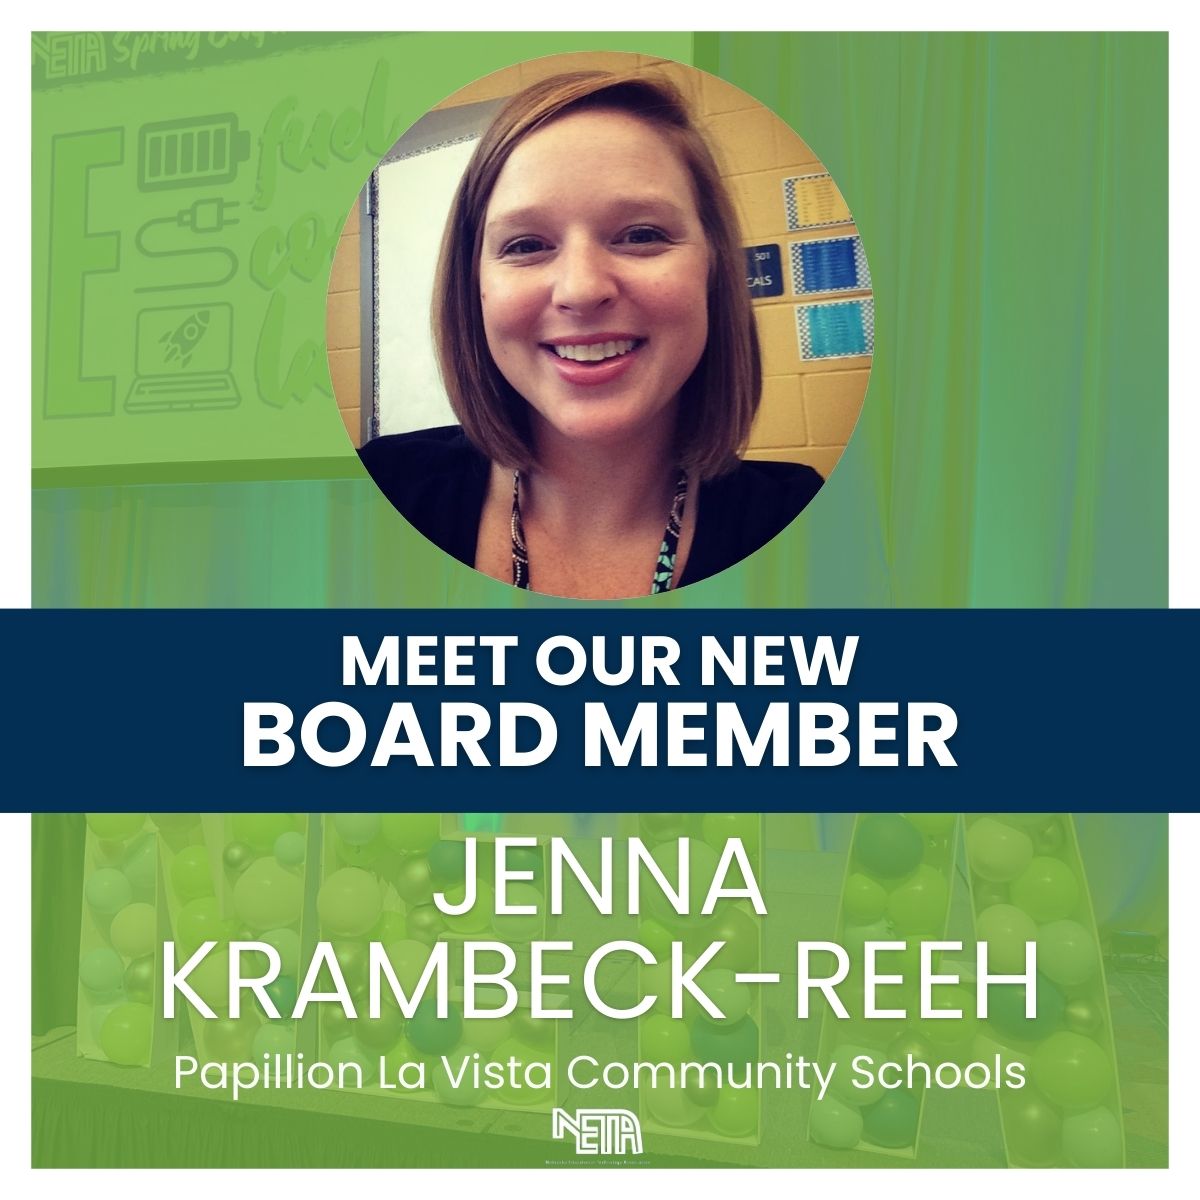 Let's give a big #yourNETA welcome back to one of our newest board members, Jenna Krambeck-Reeh from Papillion La Vista Community Schools! Thank you for continuing to serve NETA members.